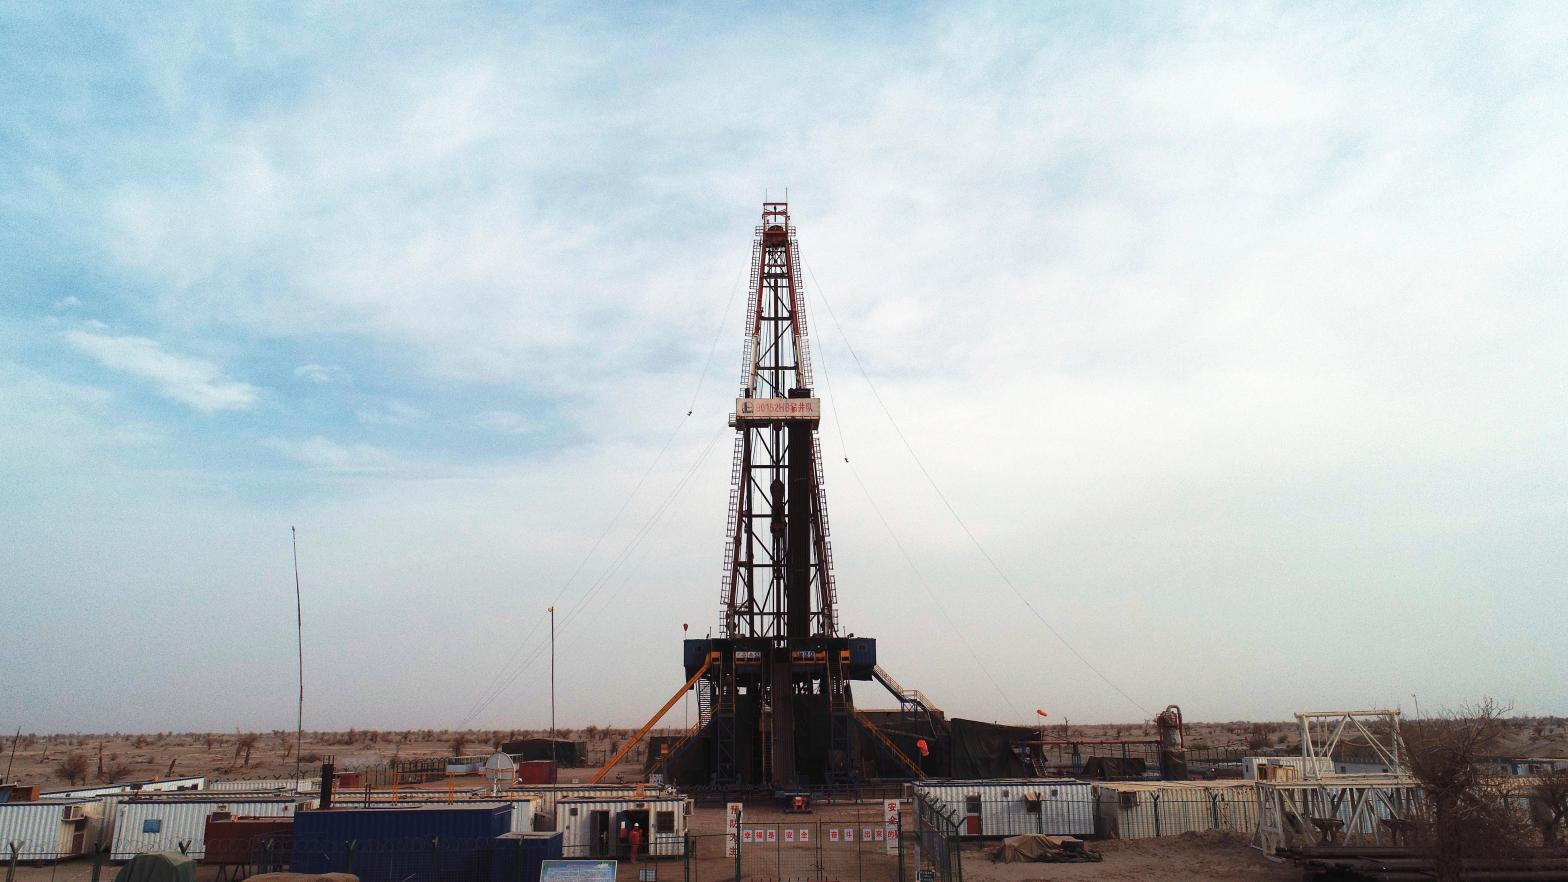 Well at the Shunbei oil and gas field belonging to Sinopec Northwest Oil Field Co. in Tarim Basin of northwest China's Xinjiang Uygur Autonomous Region, on February 21, 2019. (Photo: Imaginechina, AP)